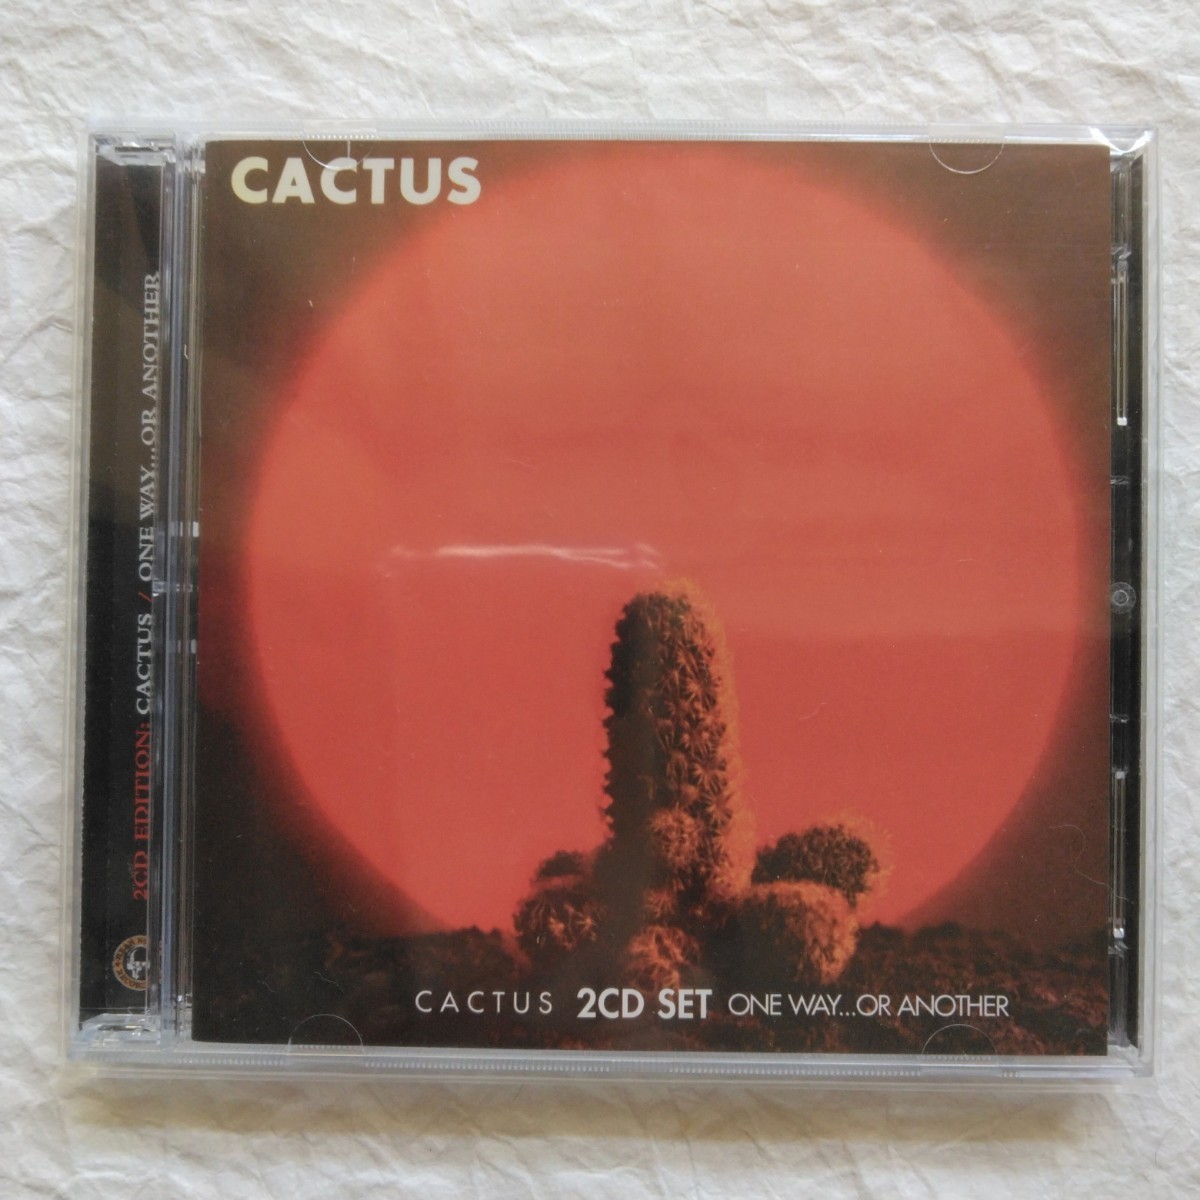 Cactus / Cactus / One Way... or Another　輸入盤　※アメリカンハードロックバンド1stアルバムと2ndアルバムのカップリング2CD仕様_画像1